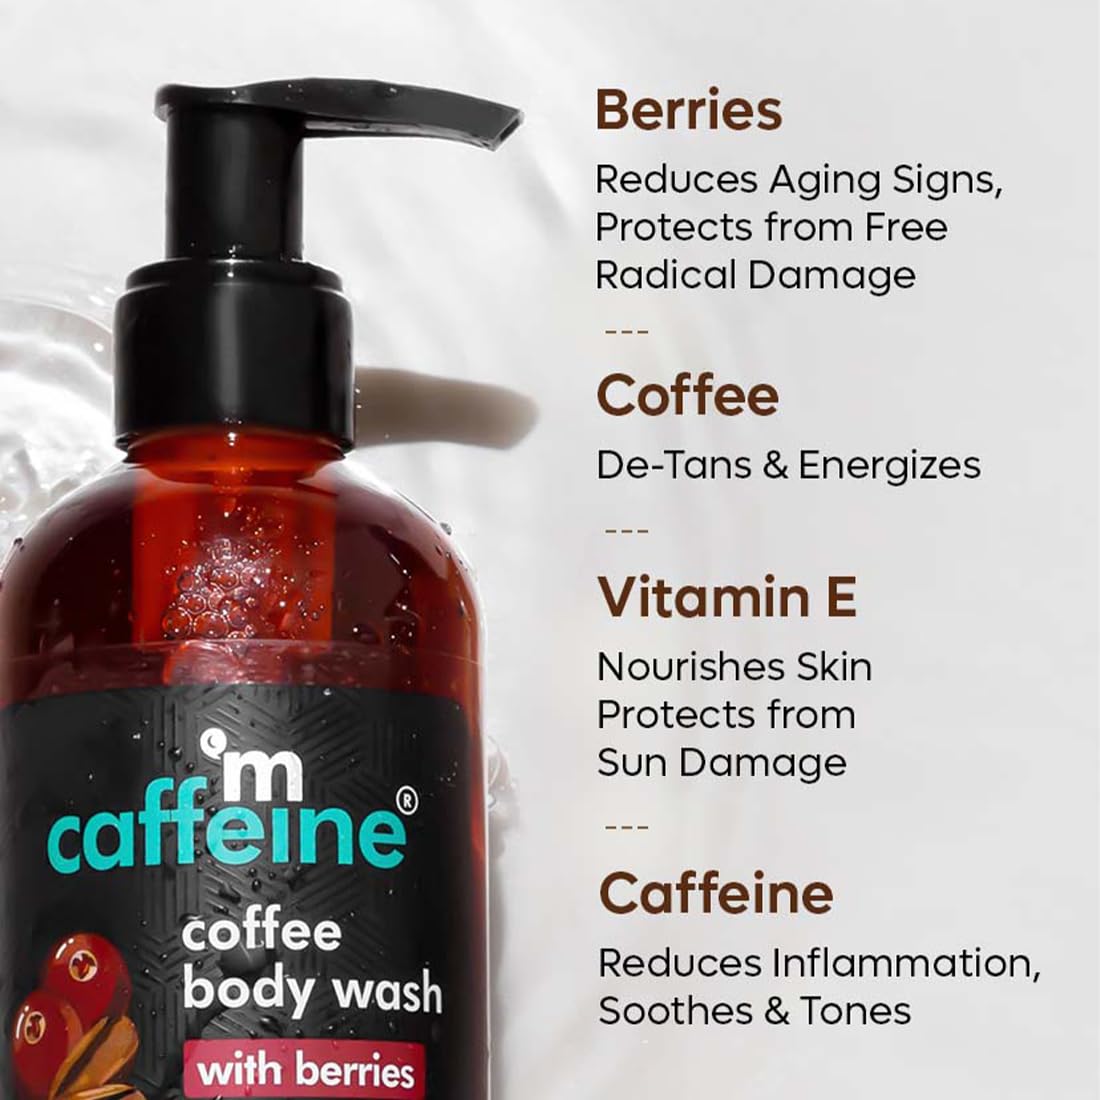 mCaffeine Daily Cleanse and moisturize Kit